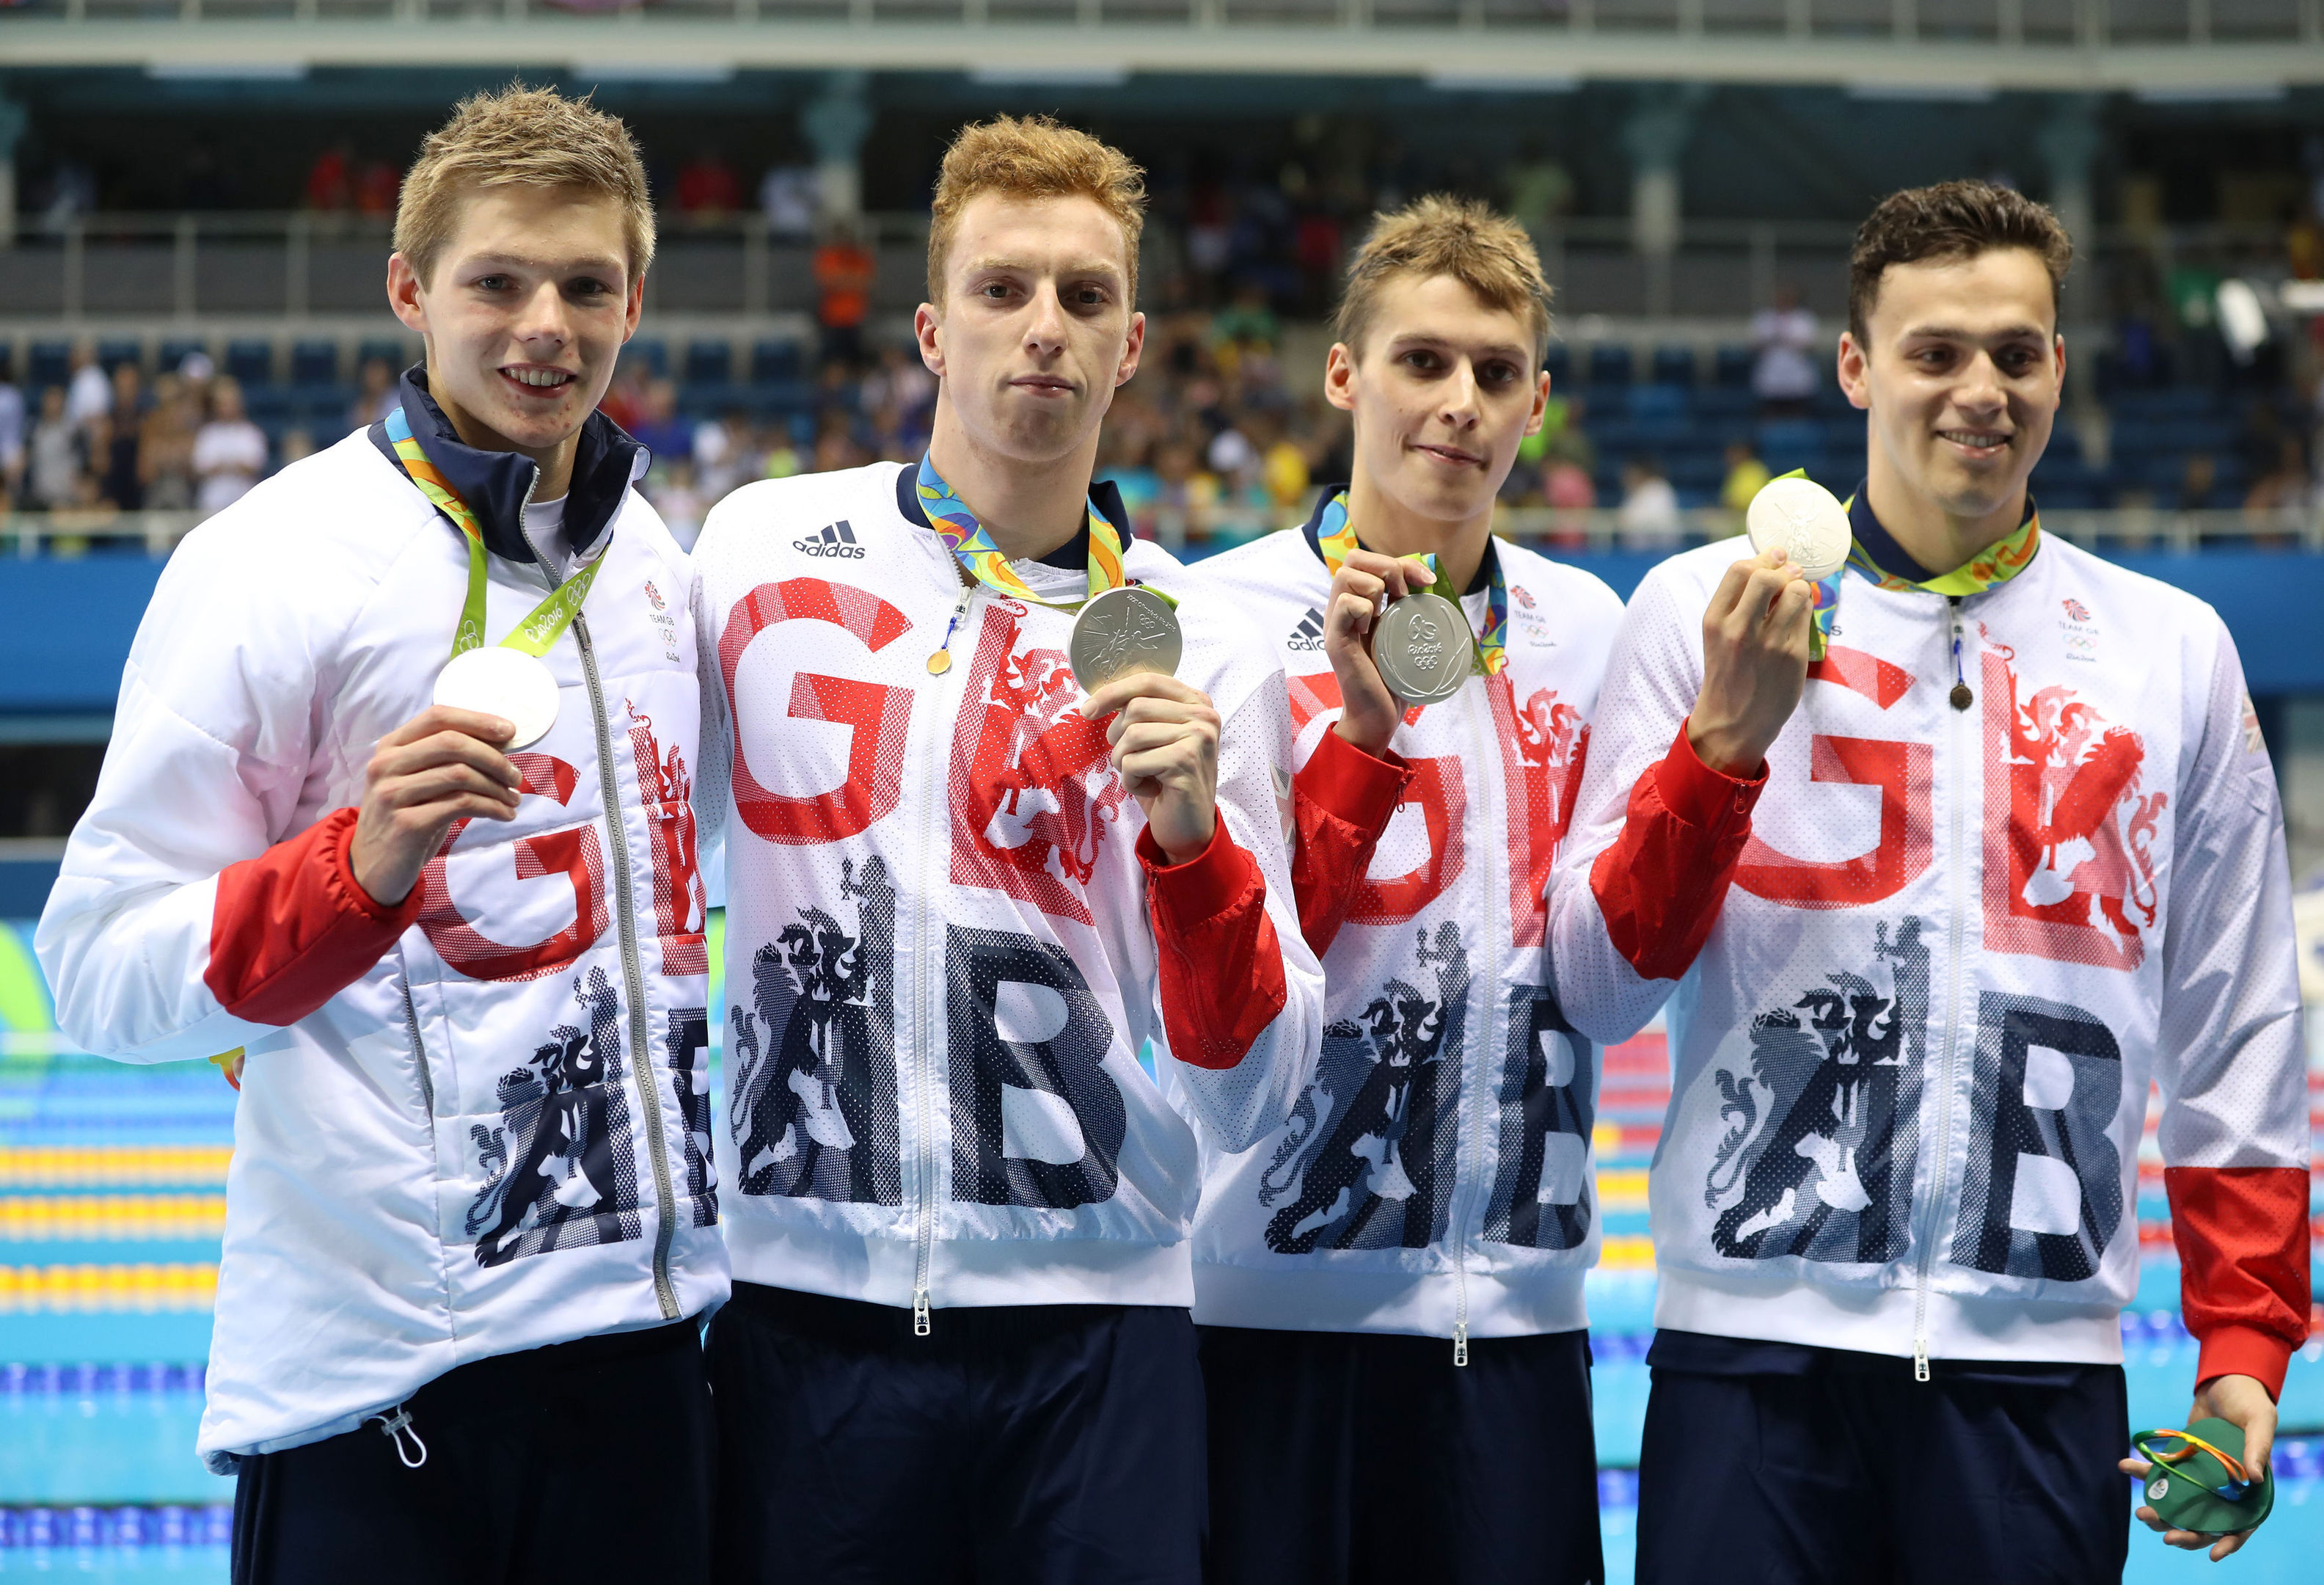 Great Britain's James Guy, Stephen Milne, Duncan Scott and Dan Wallace with their silver medals (Mike Egerton/PA Wire)